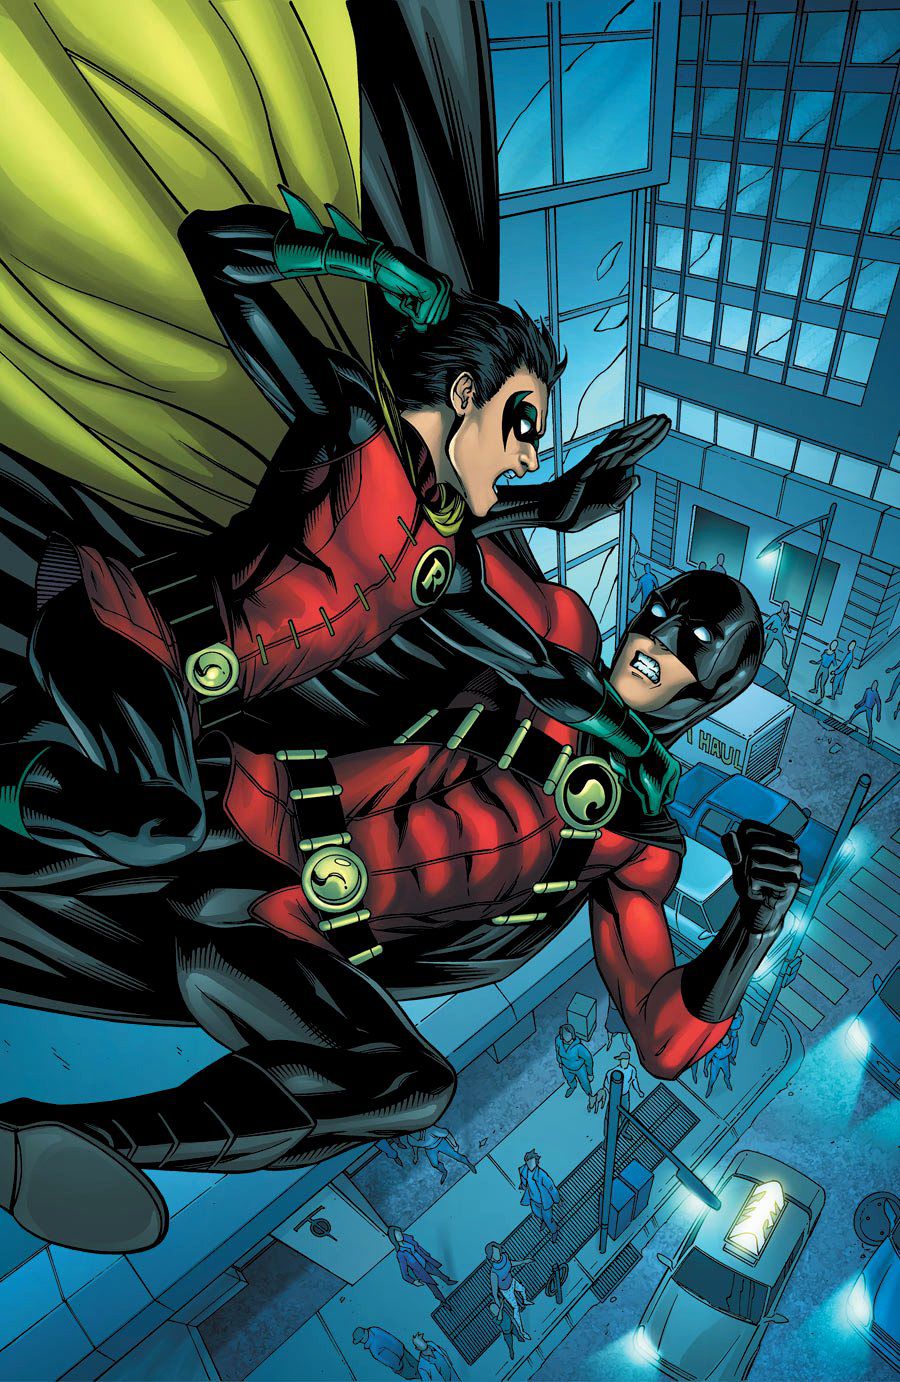 Damian Wayne/Robin and Tim Drake/Red Robin duke it out on the cover of Red Robin #14 (2010)